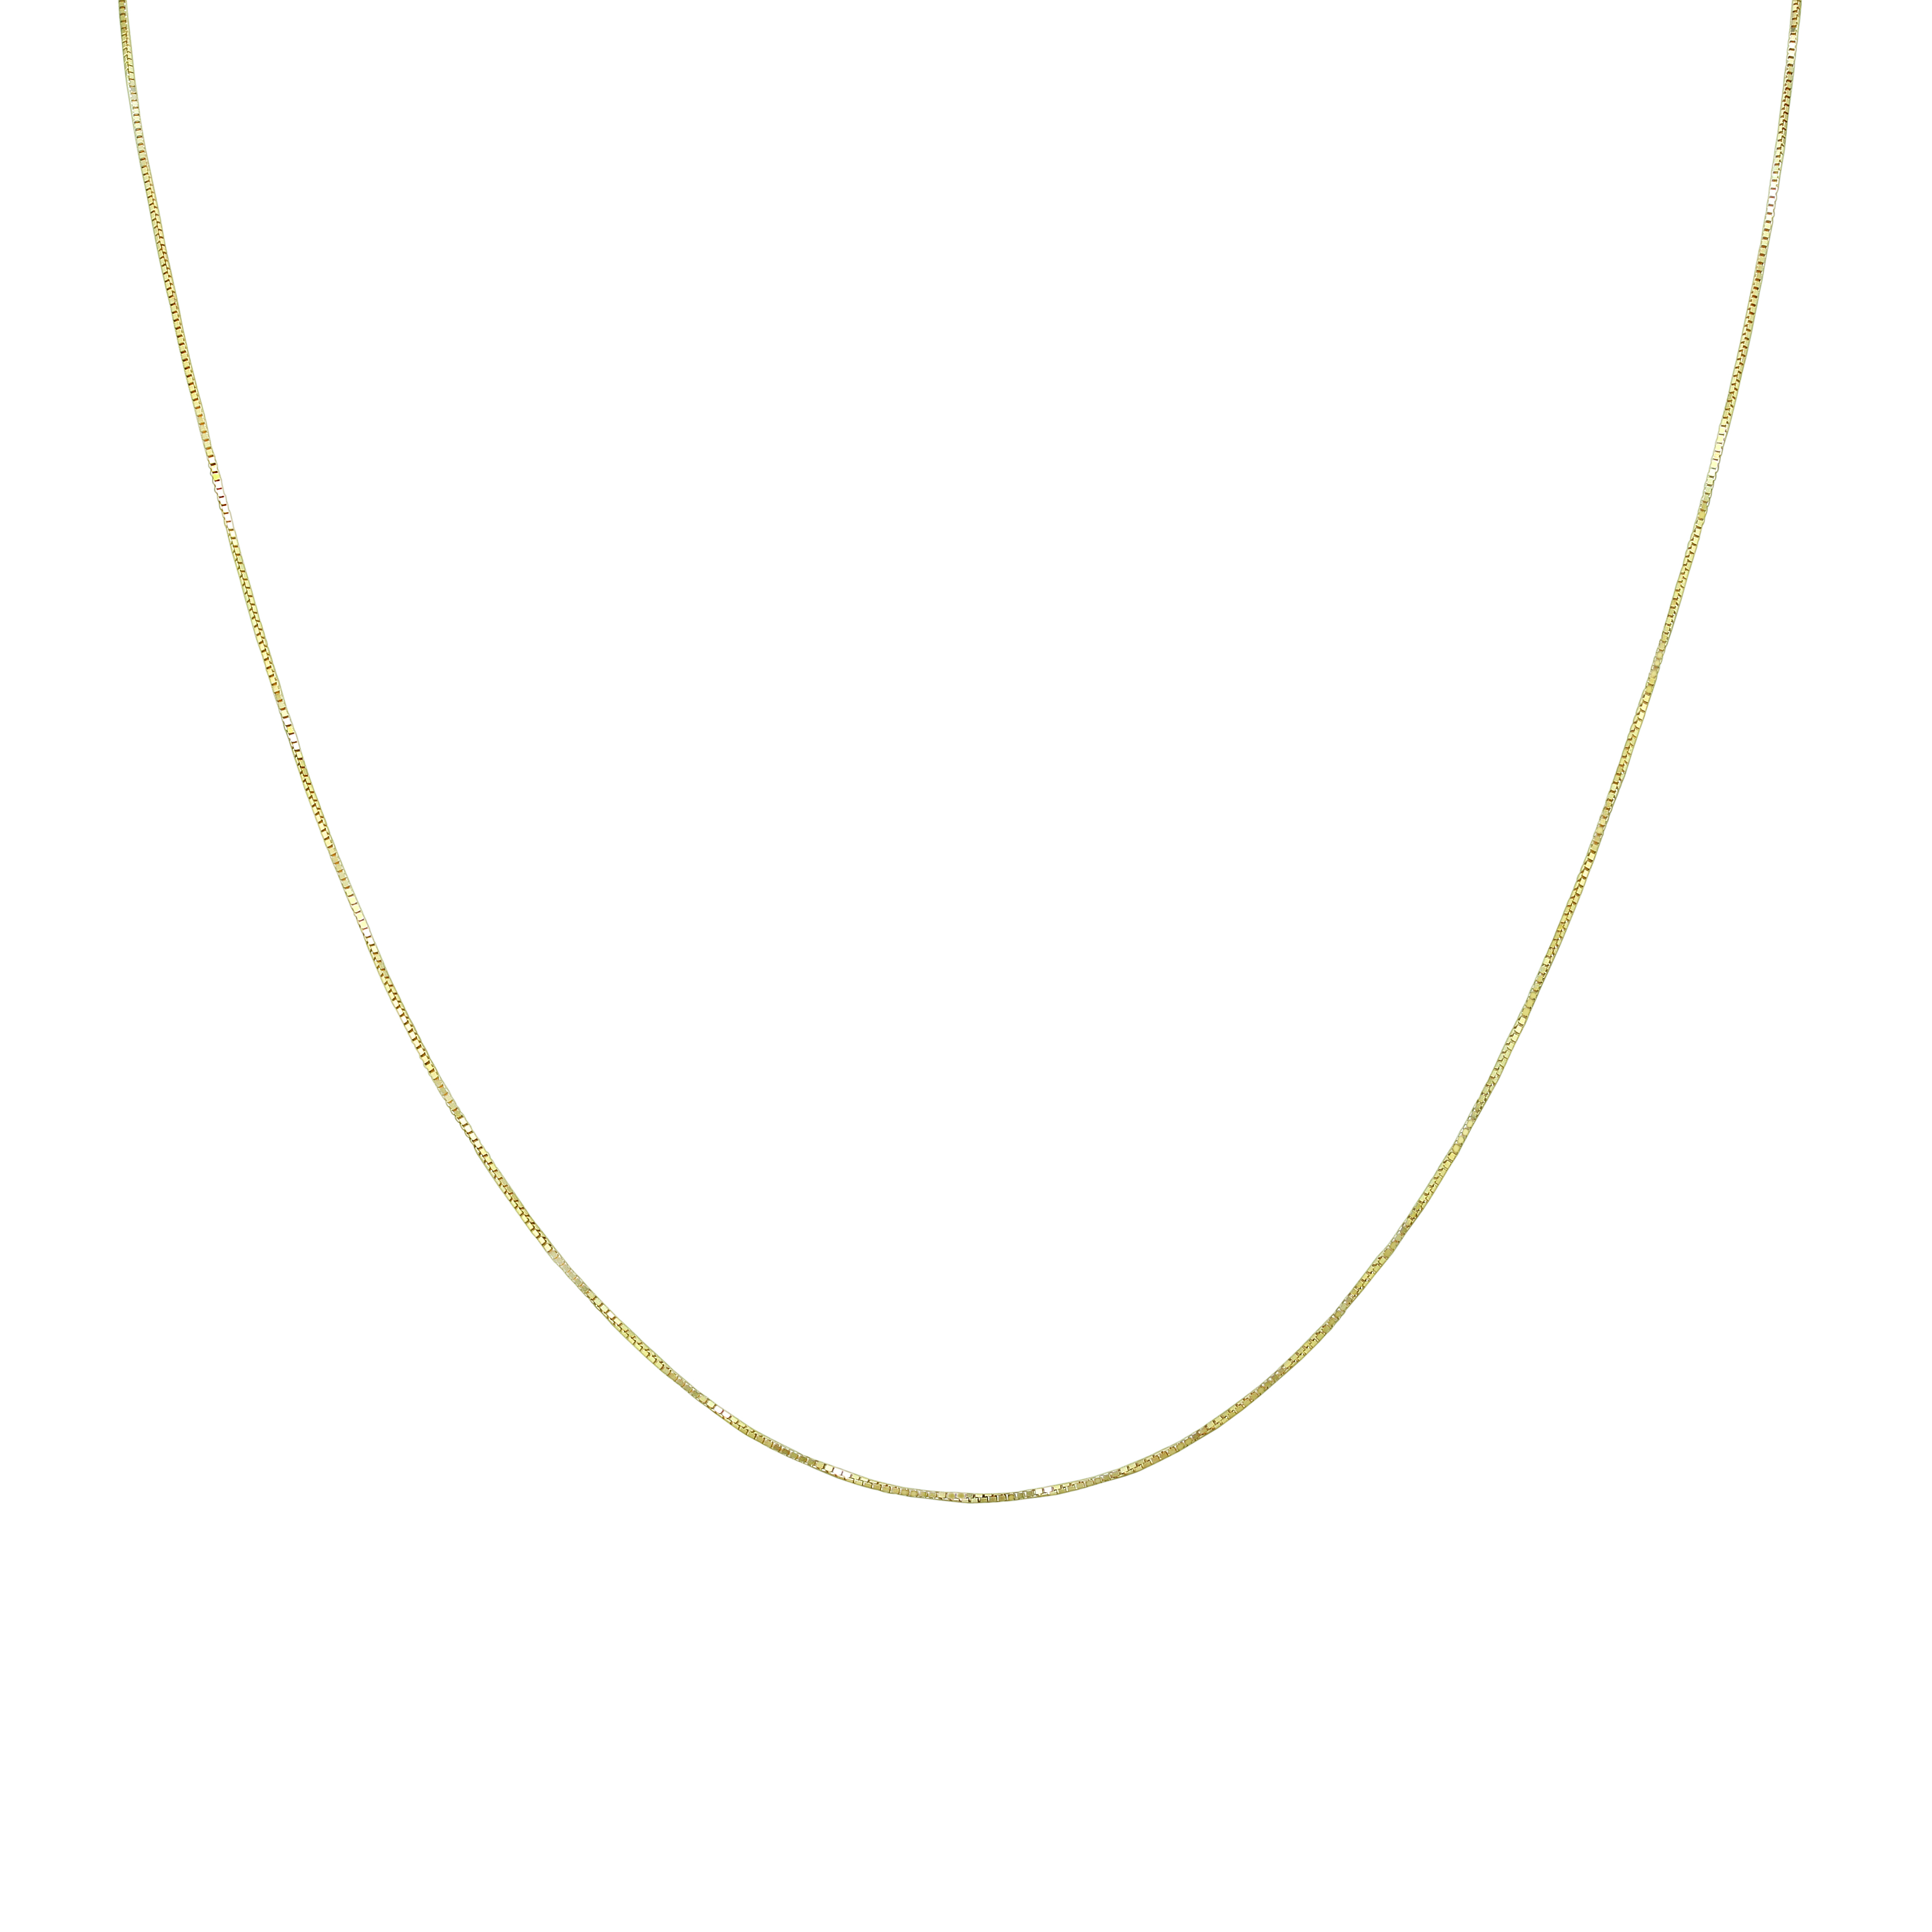 10K Yellow Gold 0.6mm Shiny Classic Box Chain with Spring Ring Clasp - 16 Inch